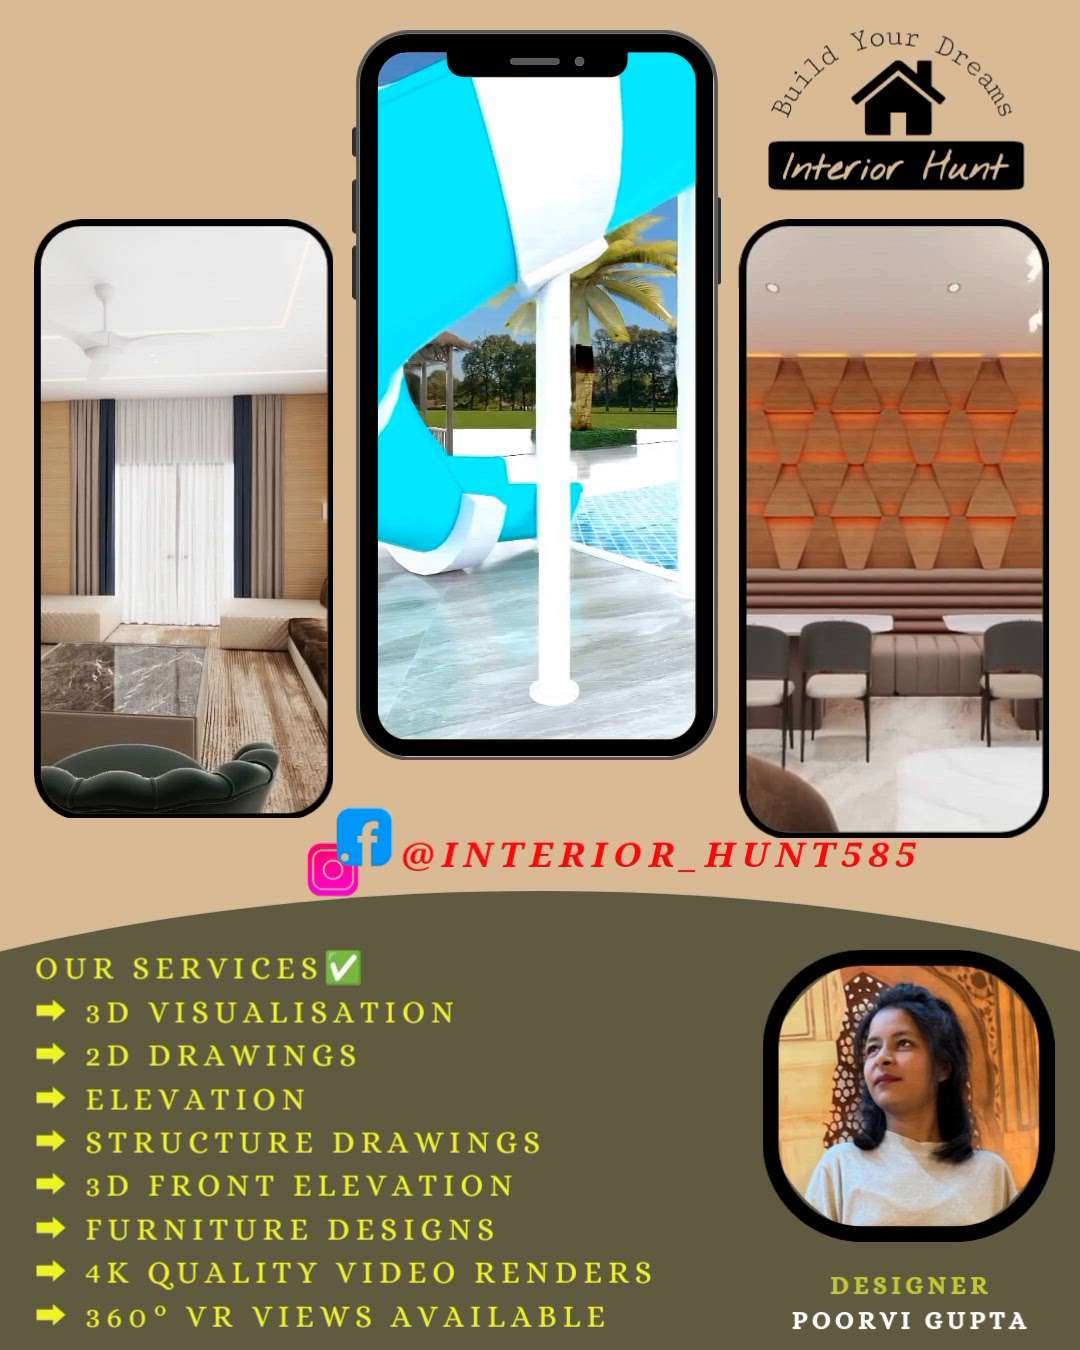 Category: Interior Designs✅
CONNECT ME ON INSTAGRAM ✅
 Our Services✅
➡ 3D Visualisation 
➡ 2D Drawings
➡ Elevation 
➡ Structure Drawings
➡ 3D Front Elevation 
➡ Furniture Designs 
➡ 4K Quality Video Renders 
➡ 360° VR Views Available 
Hi, my name is poorvi and I'm a Interior Designer with the ability to design at different scales spaces attractively. I developed a deep interest residential and furniture design. let's start working together!

Name: poorvi 
From: ghaziabad 
Pros: Great, high-quality designs
Starting Price: 2k 

If anyone need a interior designer, please hire me
#KitchenIdeas
#bashroomdesign 
#BedroomDecor
#beautifulhouse 
#WoodenBalcony 
#bolcony 
#affordableinteriors 
#beatuifulhouse 
#interiordesigners 
#ghaziabadinterior 
#LivingroomDesigns 
#beatuifuldesign 
#InteriorDesigner 
#best_architect 
#Architect 
#architecturedesigns 
#Contractor
#WoodenBalcony 
#LivingRoomTable
#LivingRoomSofa 
#LivingRoomTVCabinet 
#LivingRoomTVCabinet 
#Furnishings 
#furnitures 
#exterior